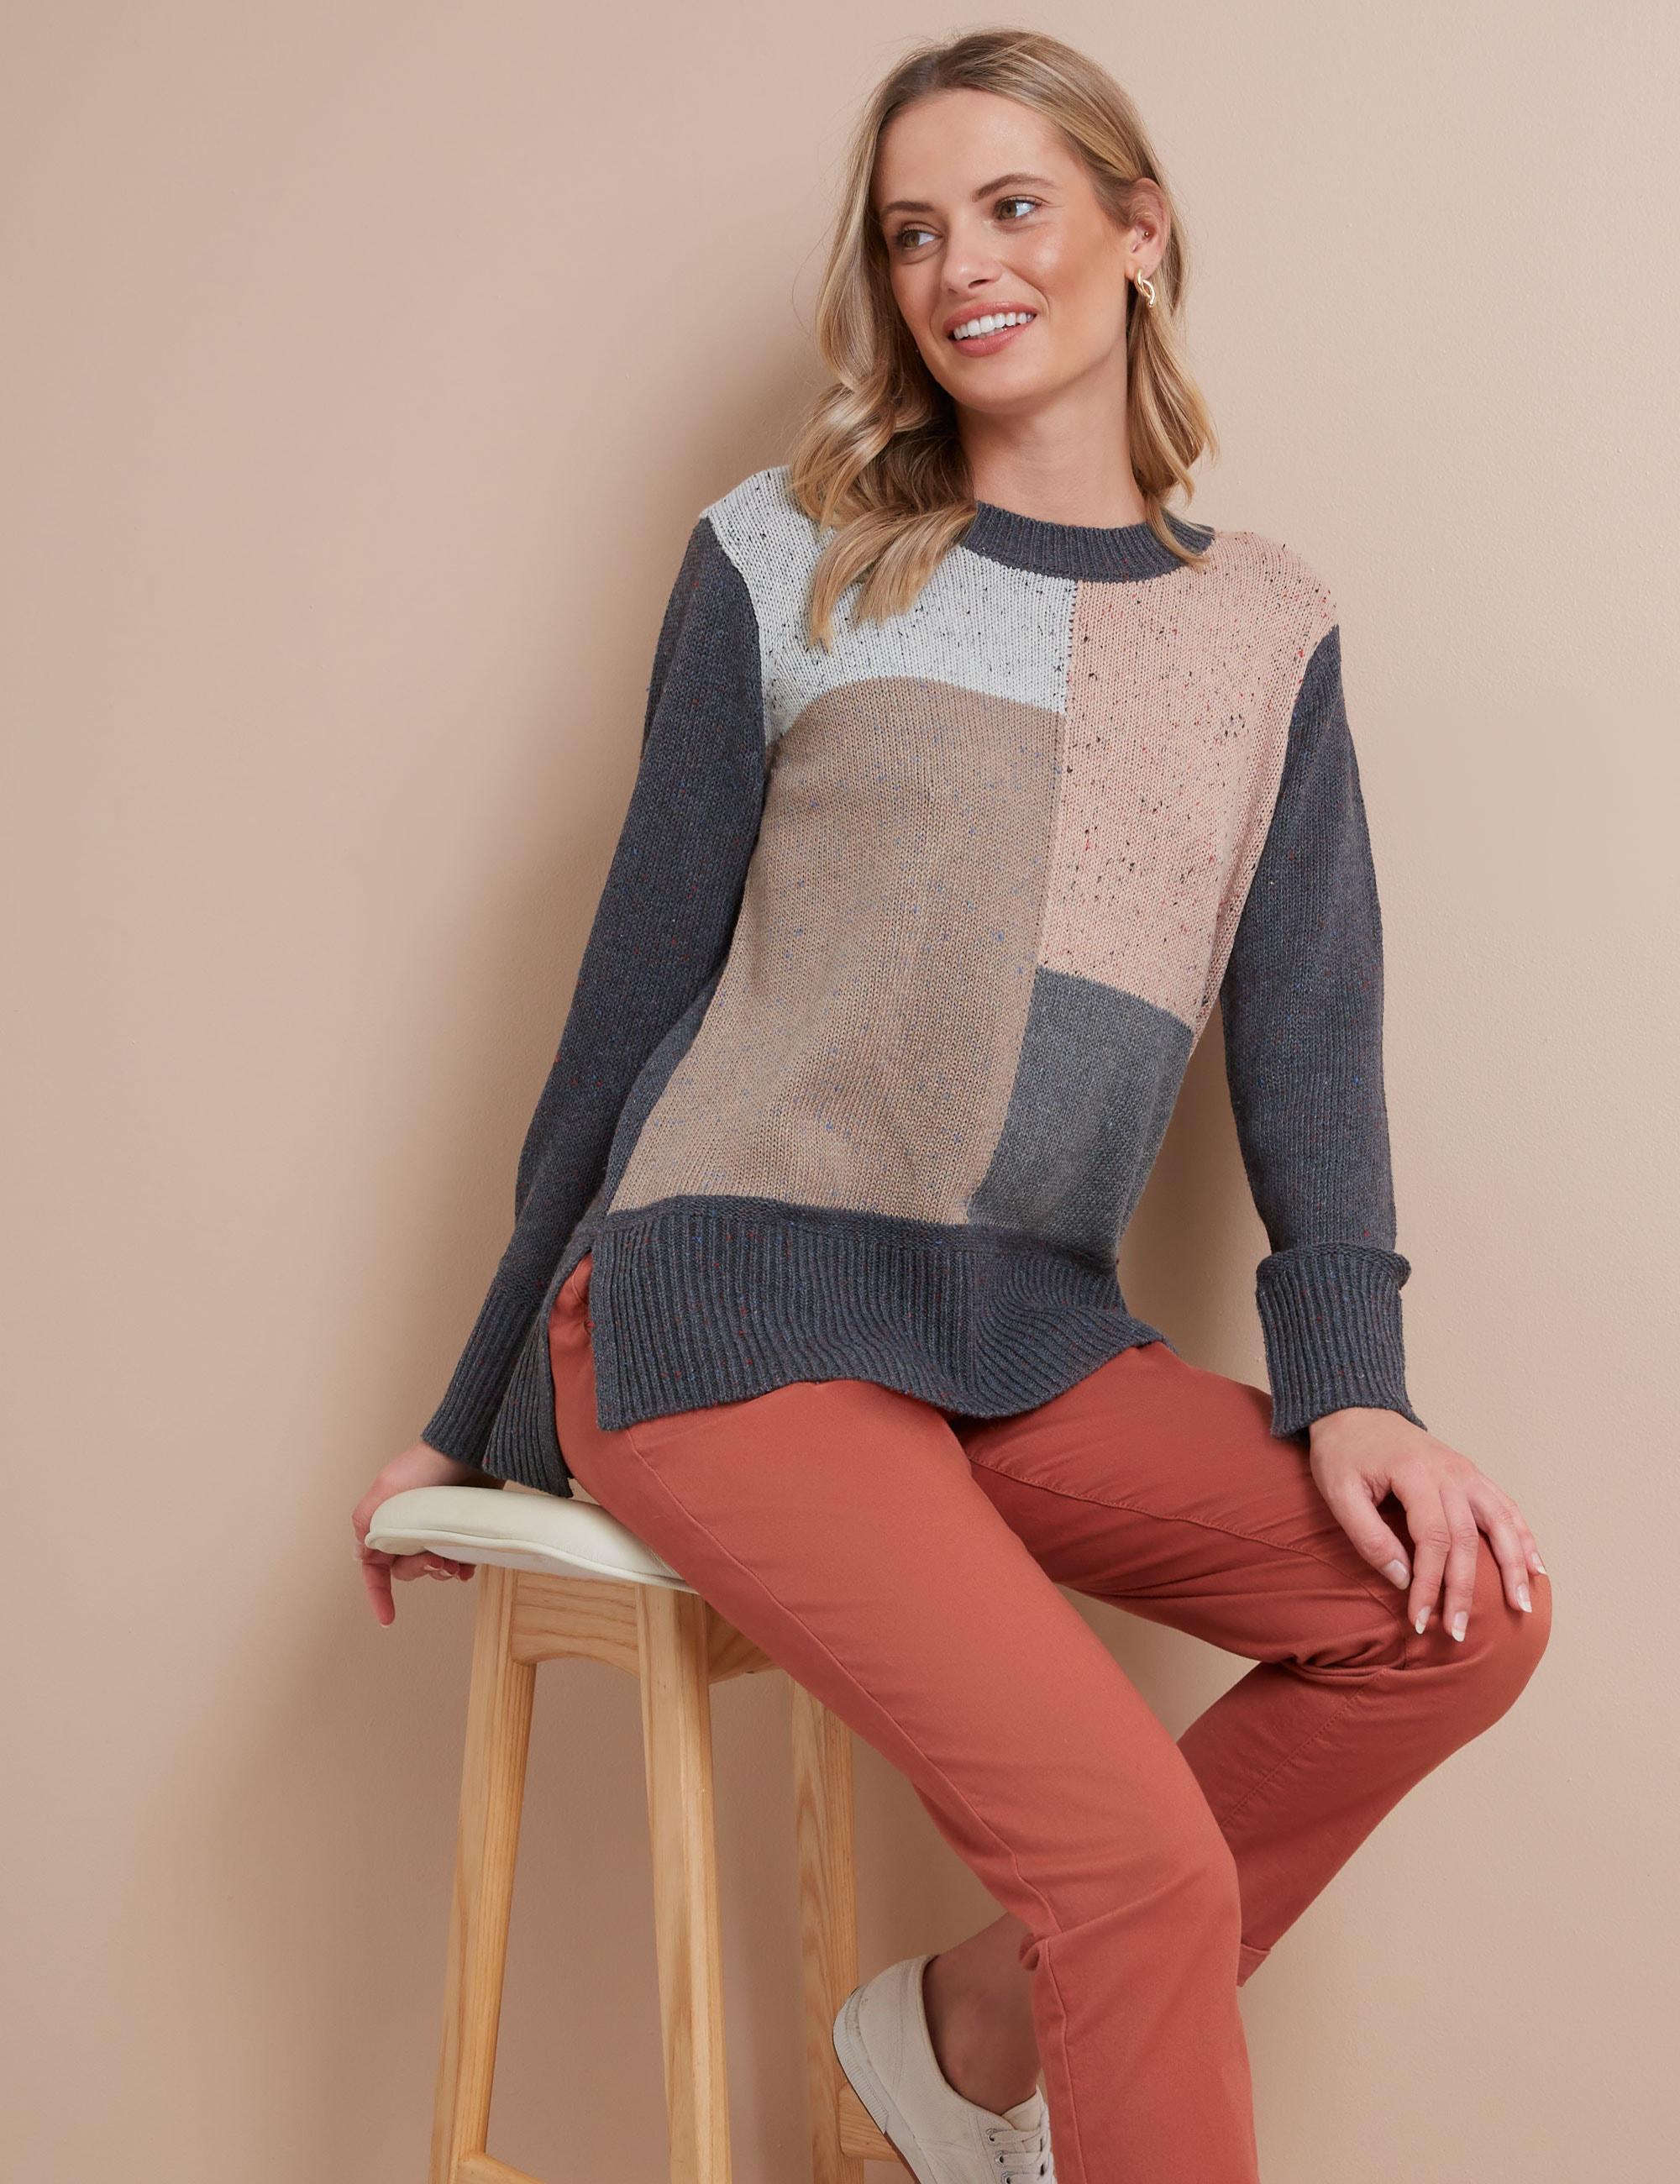 W LANE - Womens Jumper - Long Winter Sweater - Pink Pullover - Cotton Clothing - Long Sleeve - Pink Colourblock Abstract - Crew Neck Casual Work Wear